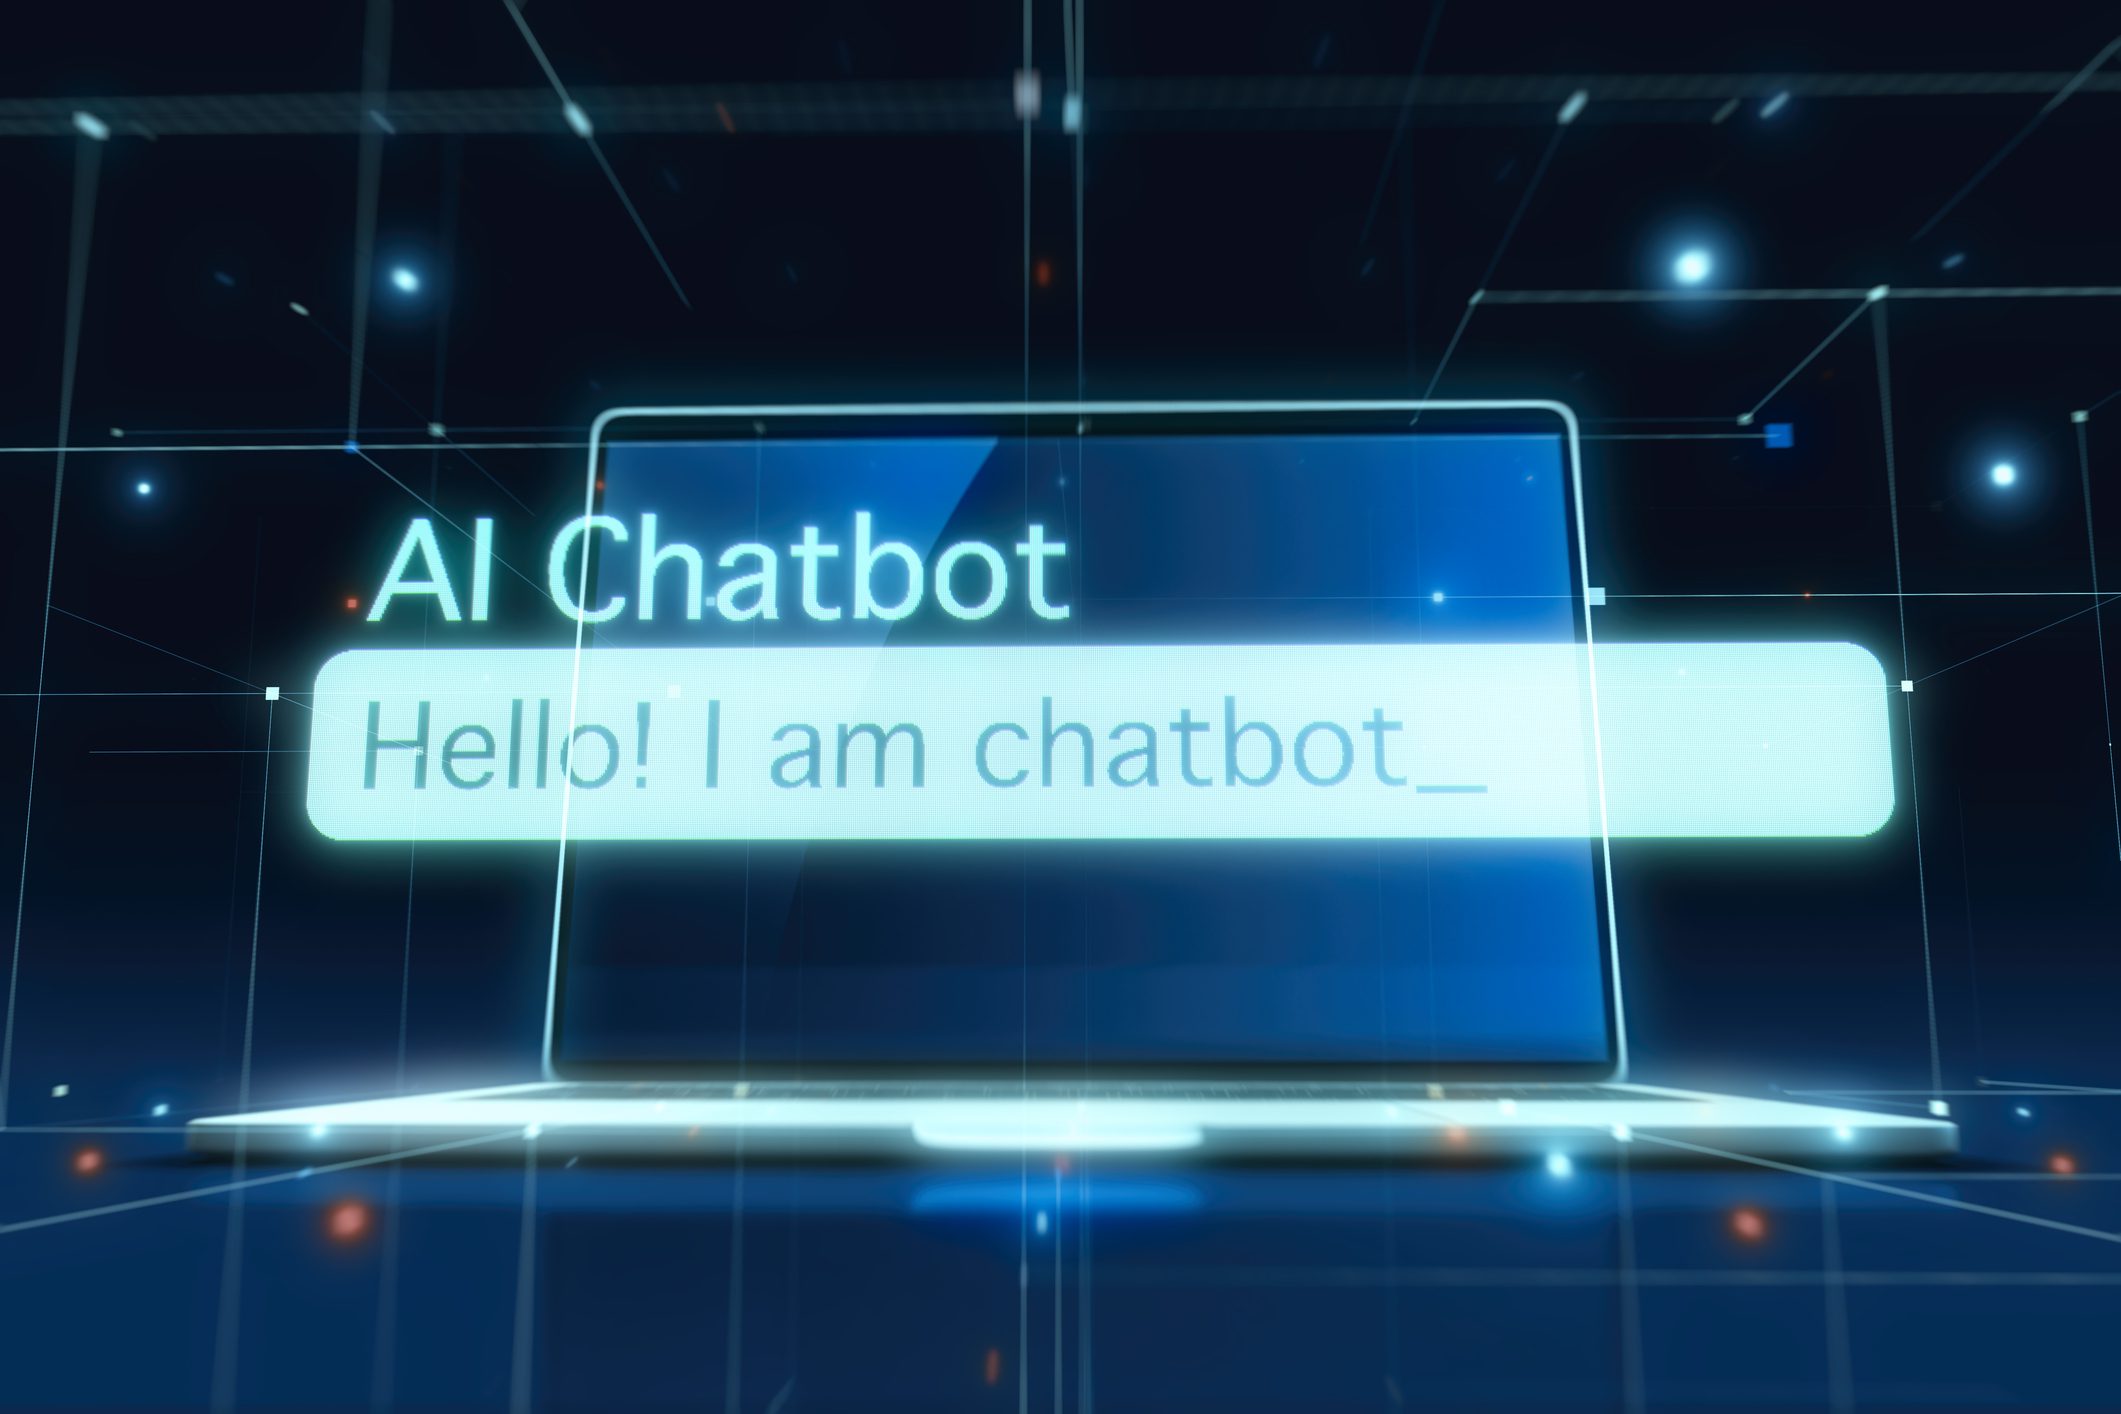 A screen showing the following text "AI Chatbot" "Hello! I am a chatbot"